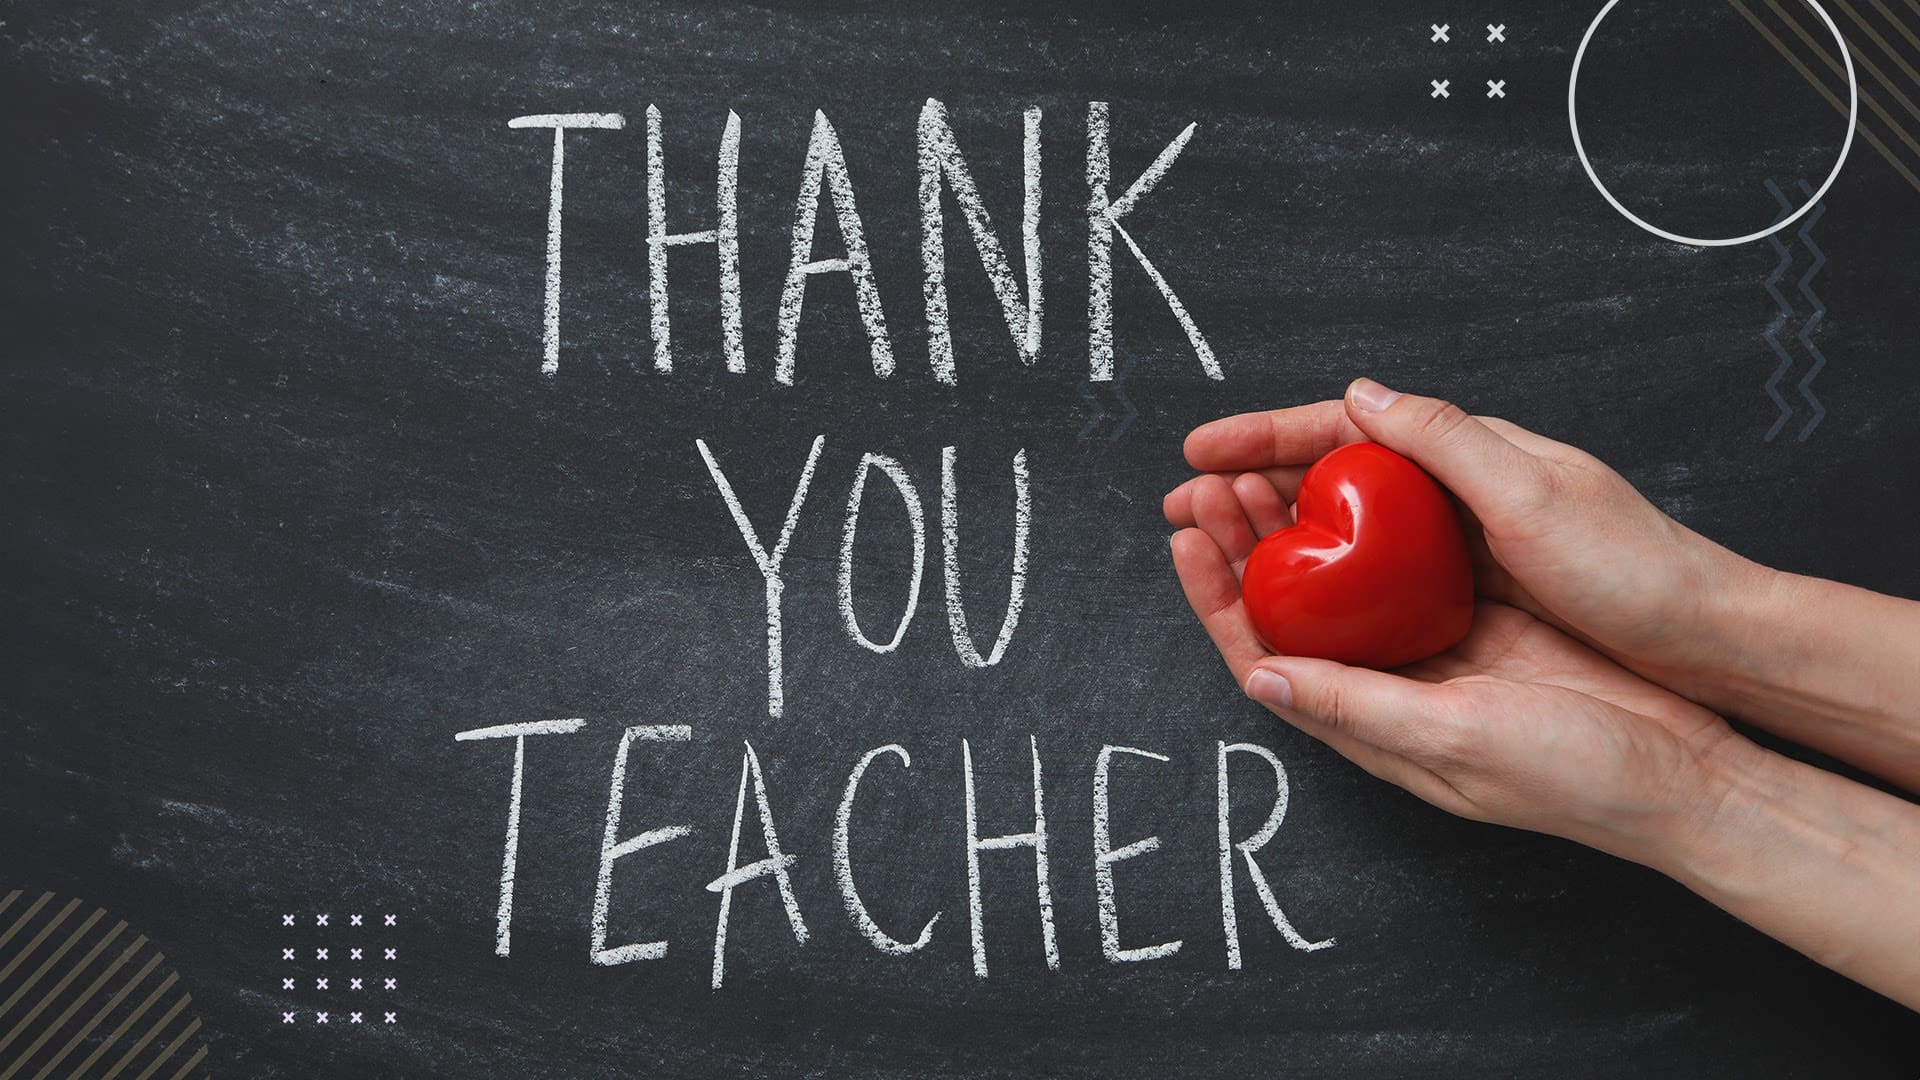 Thank You Teacher written out on black board with person holding an apple